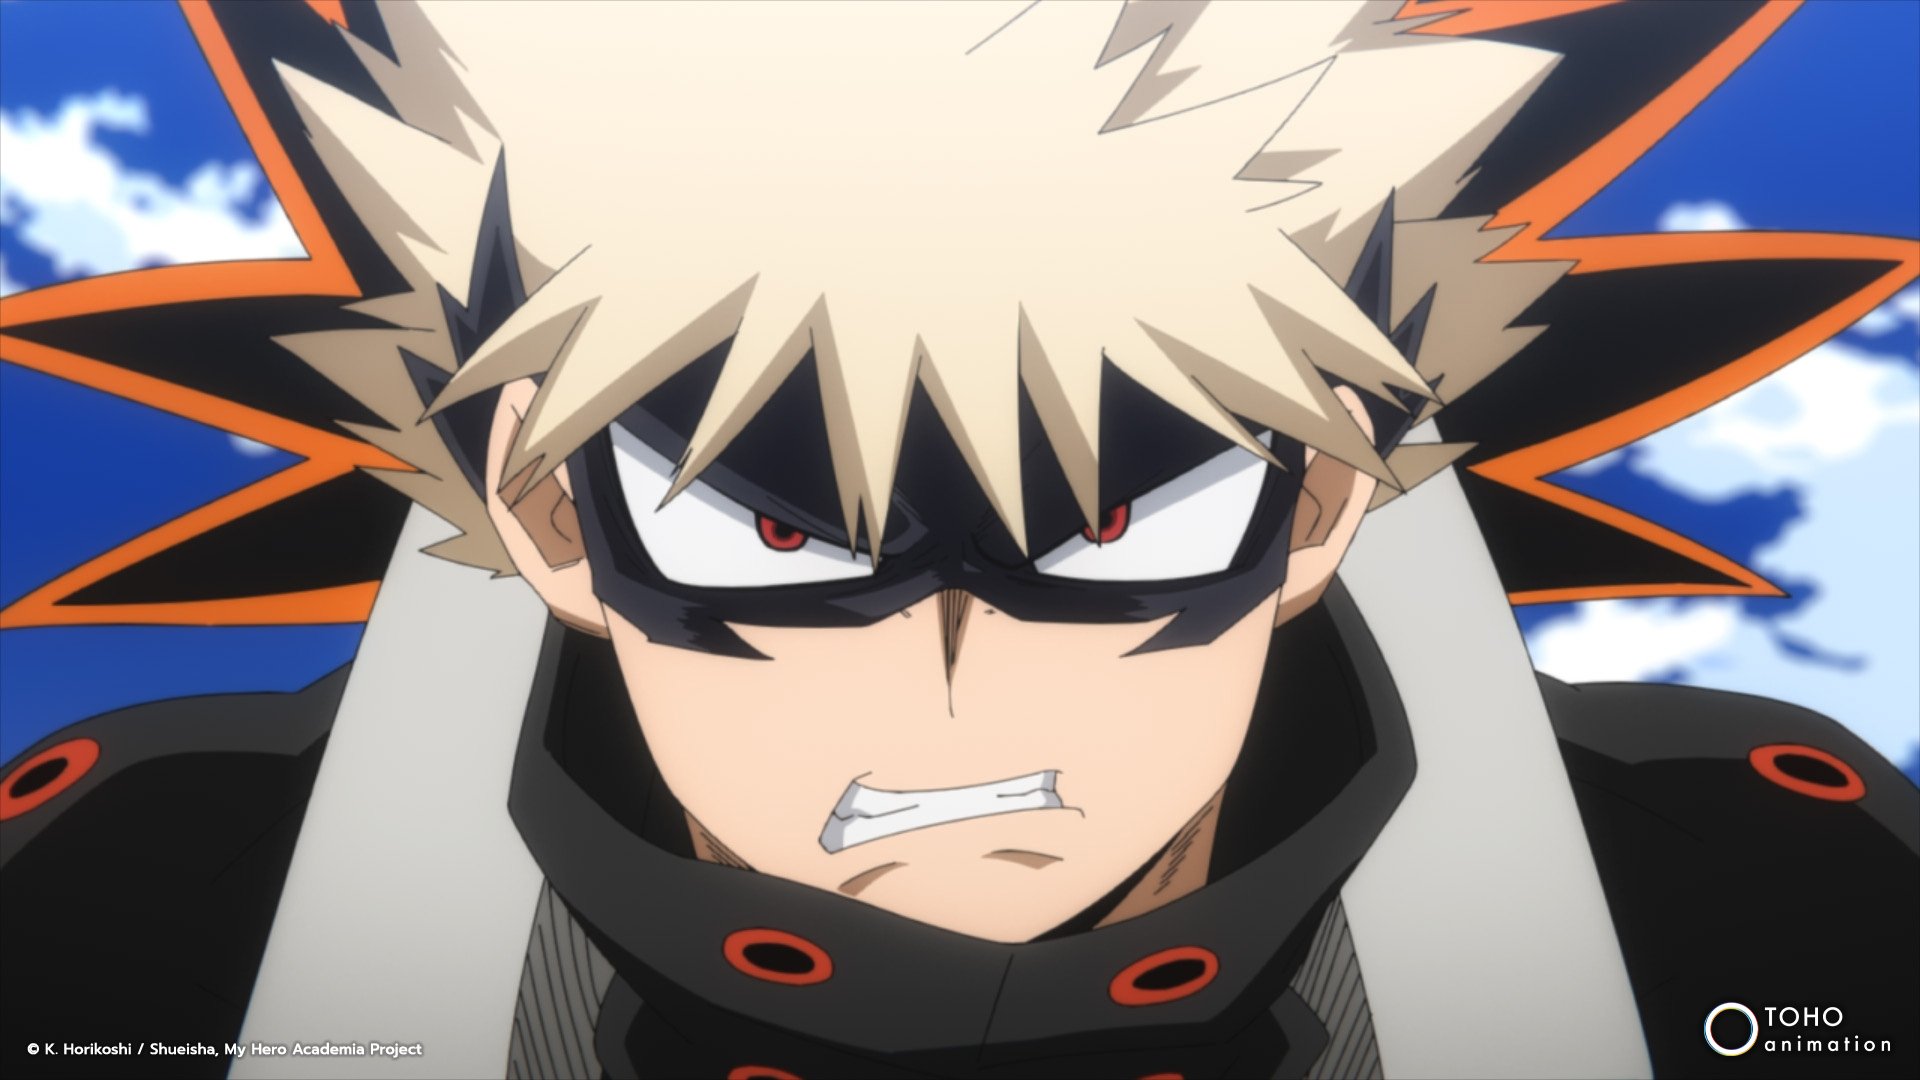 5 Characters We Can't Wait to See in 'My Hero Academia' Season 3